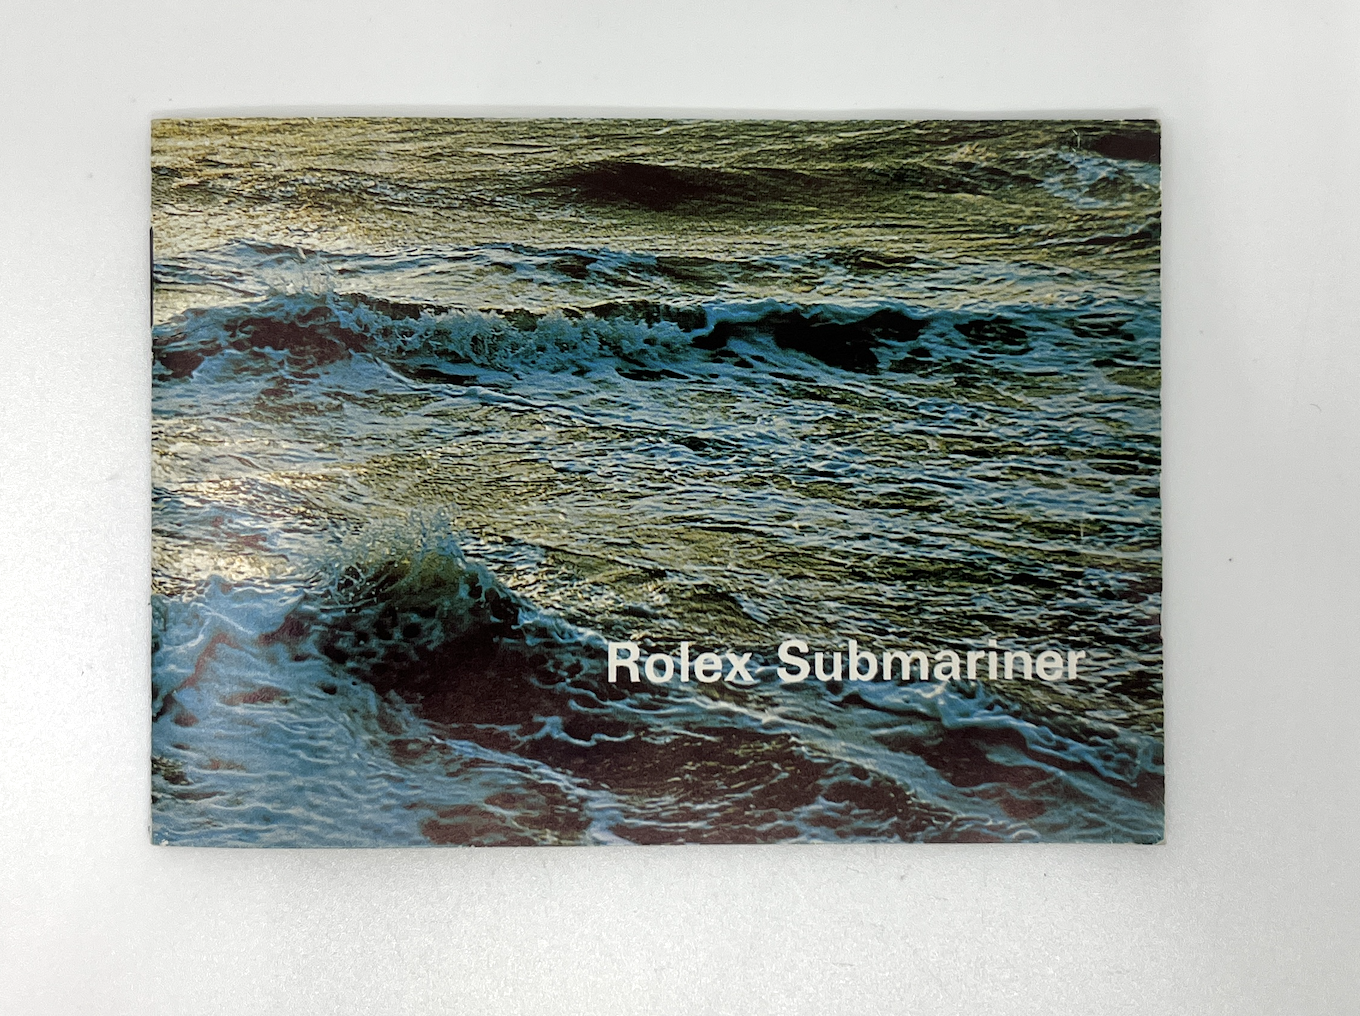 pre owned Rolex SUBMARINER Booklet from 1972 in German